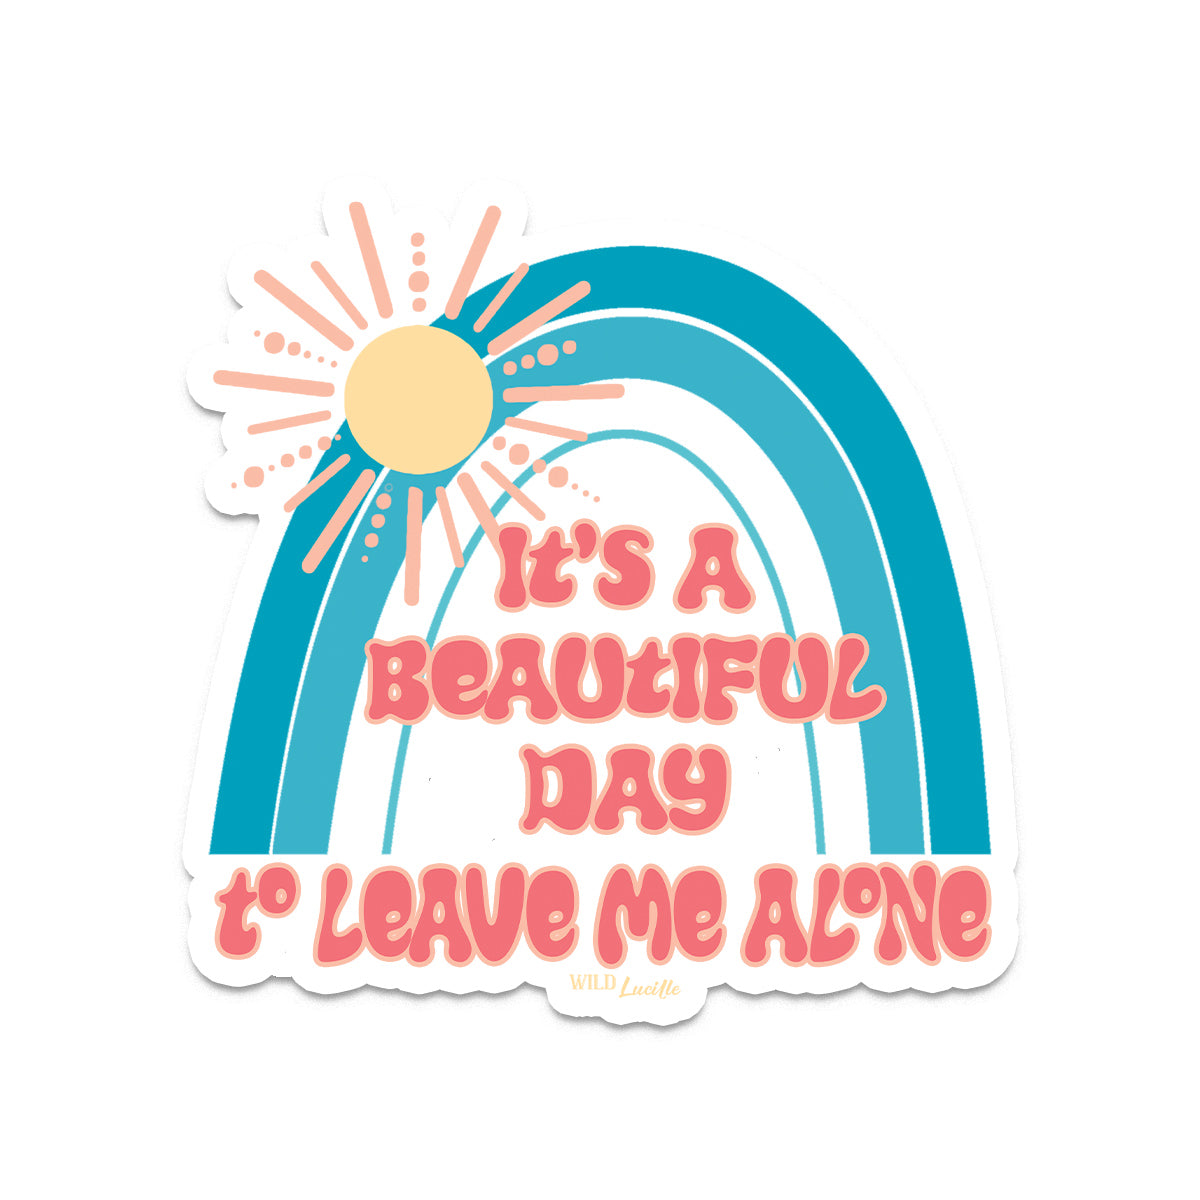 It's a Beautiful Day To Leave Me Alone - Jumbo Sassy Decal